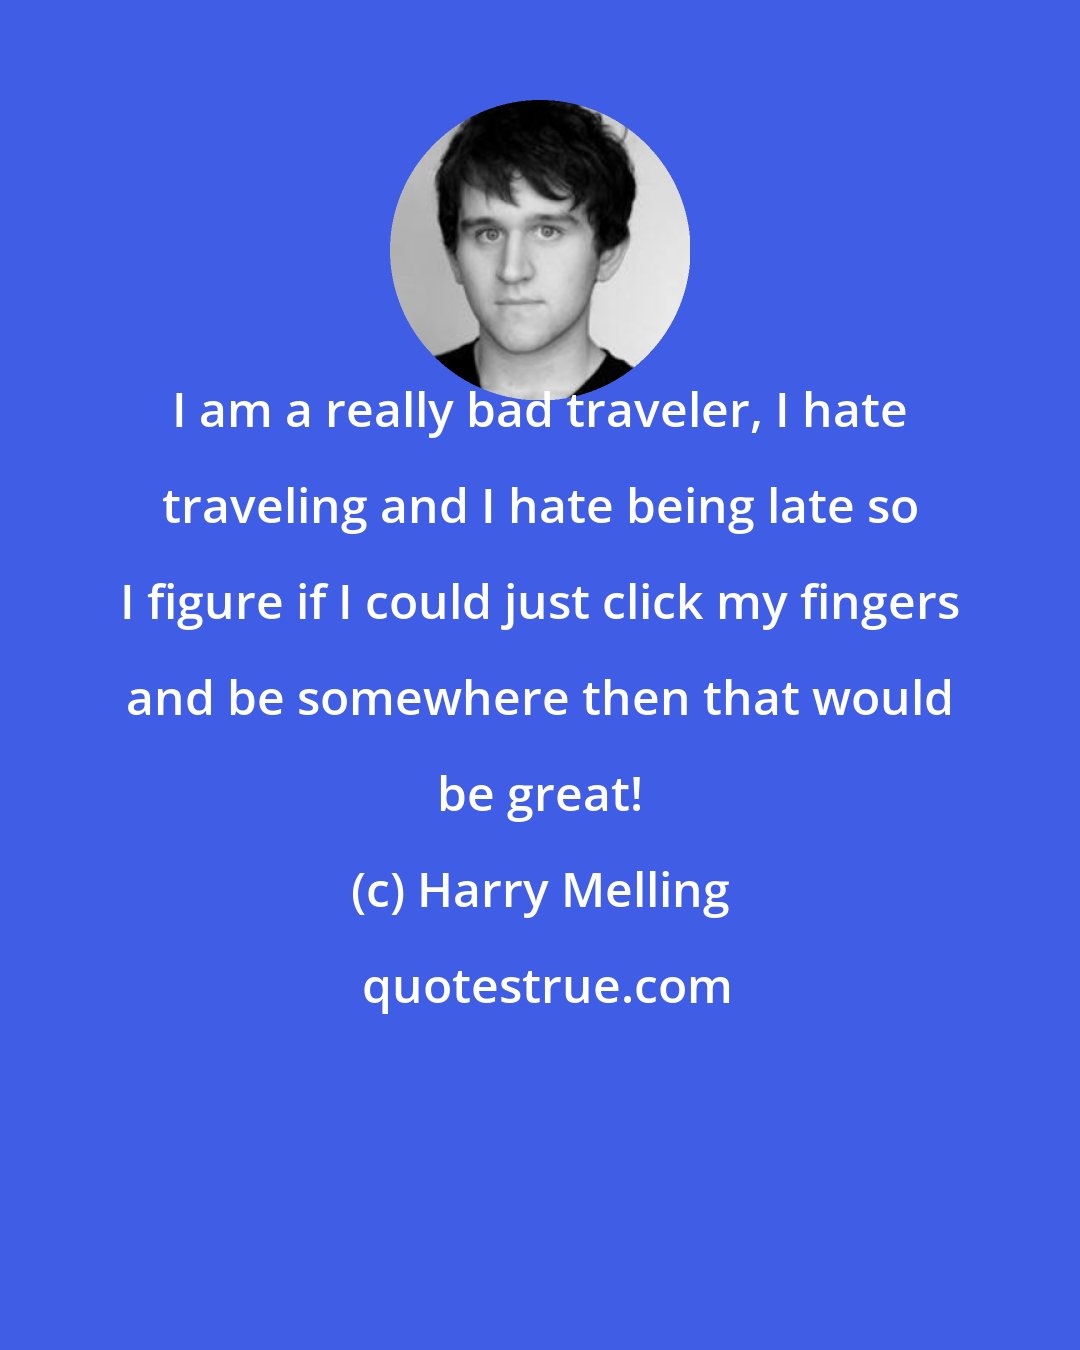 Harry Melling: I am a really bad traveler, I hate traveling and I hate being late so I figure if I could just click my fingers and be somewhere then that would be great!